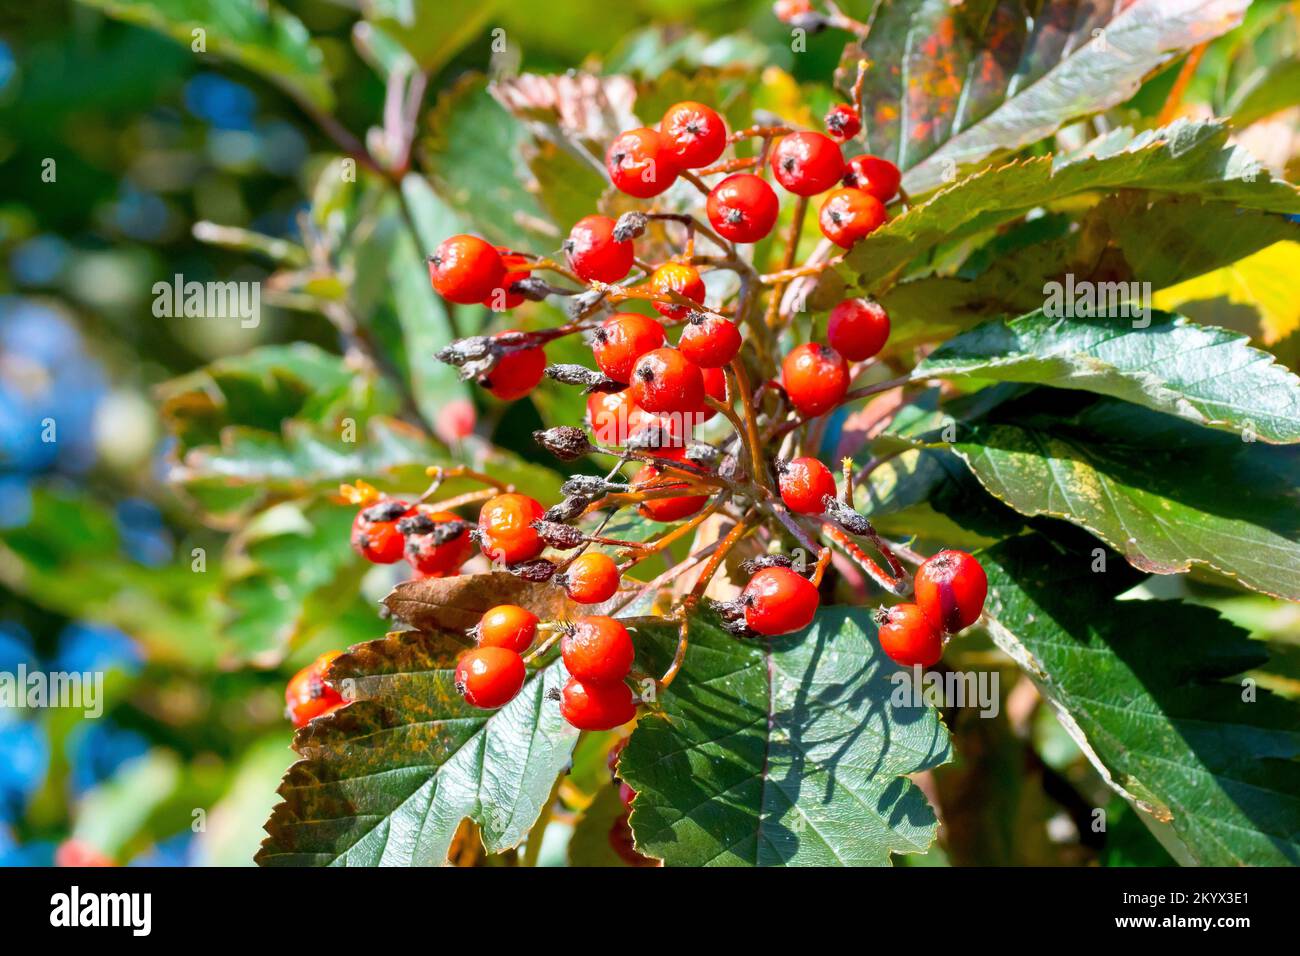 White Beam or Whitebeam (sorbus aria agg.), close up of a cluster of the red berries the tree produces in abundance in the autumn. Stock Photo